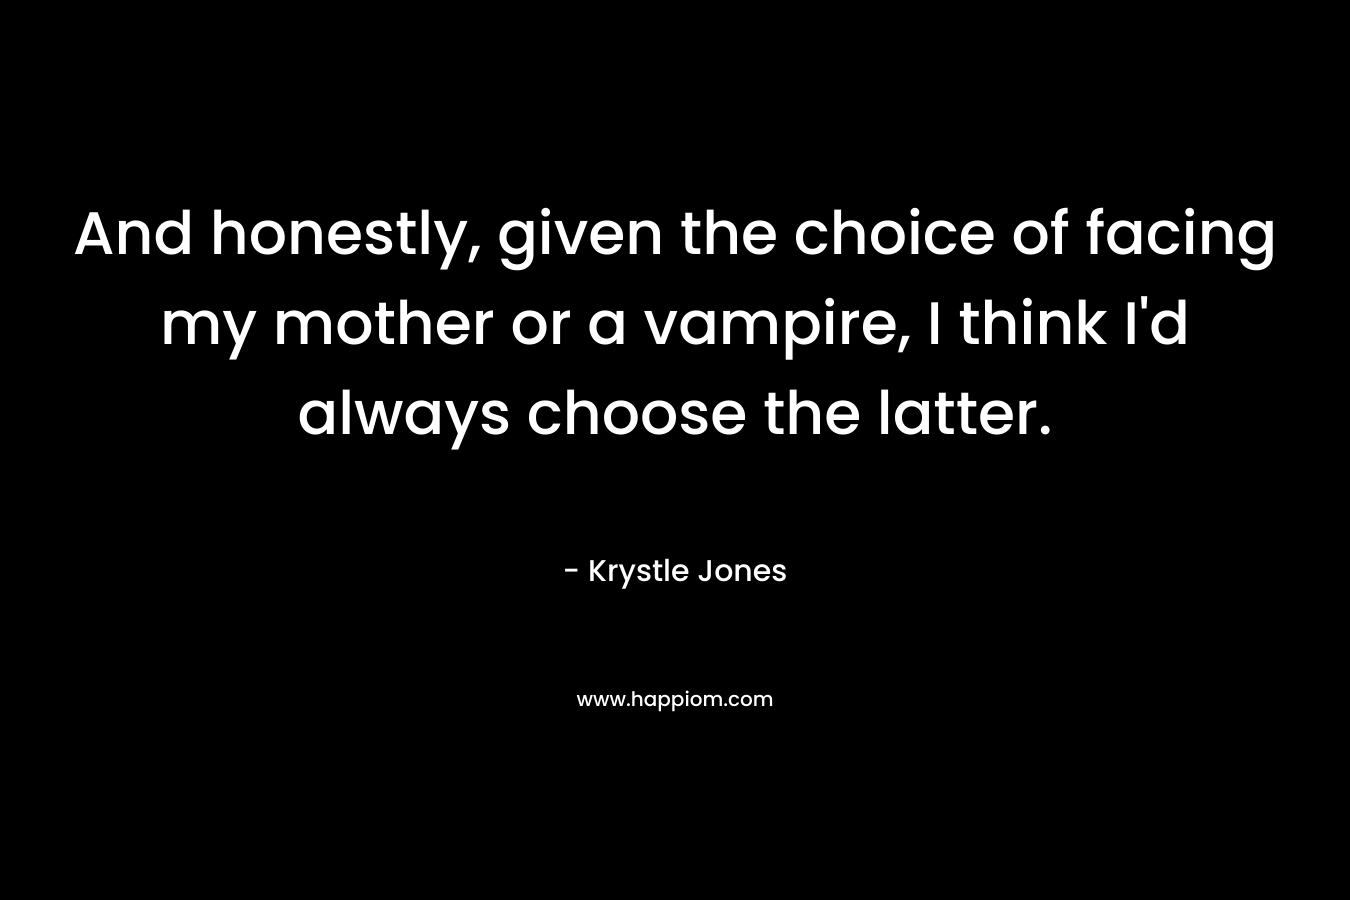 And honestly, given the choice of facing my mother or a vampire, I think I’d always choose the latter. – Krystle Jones